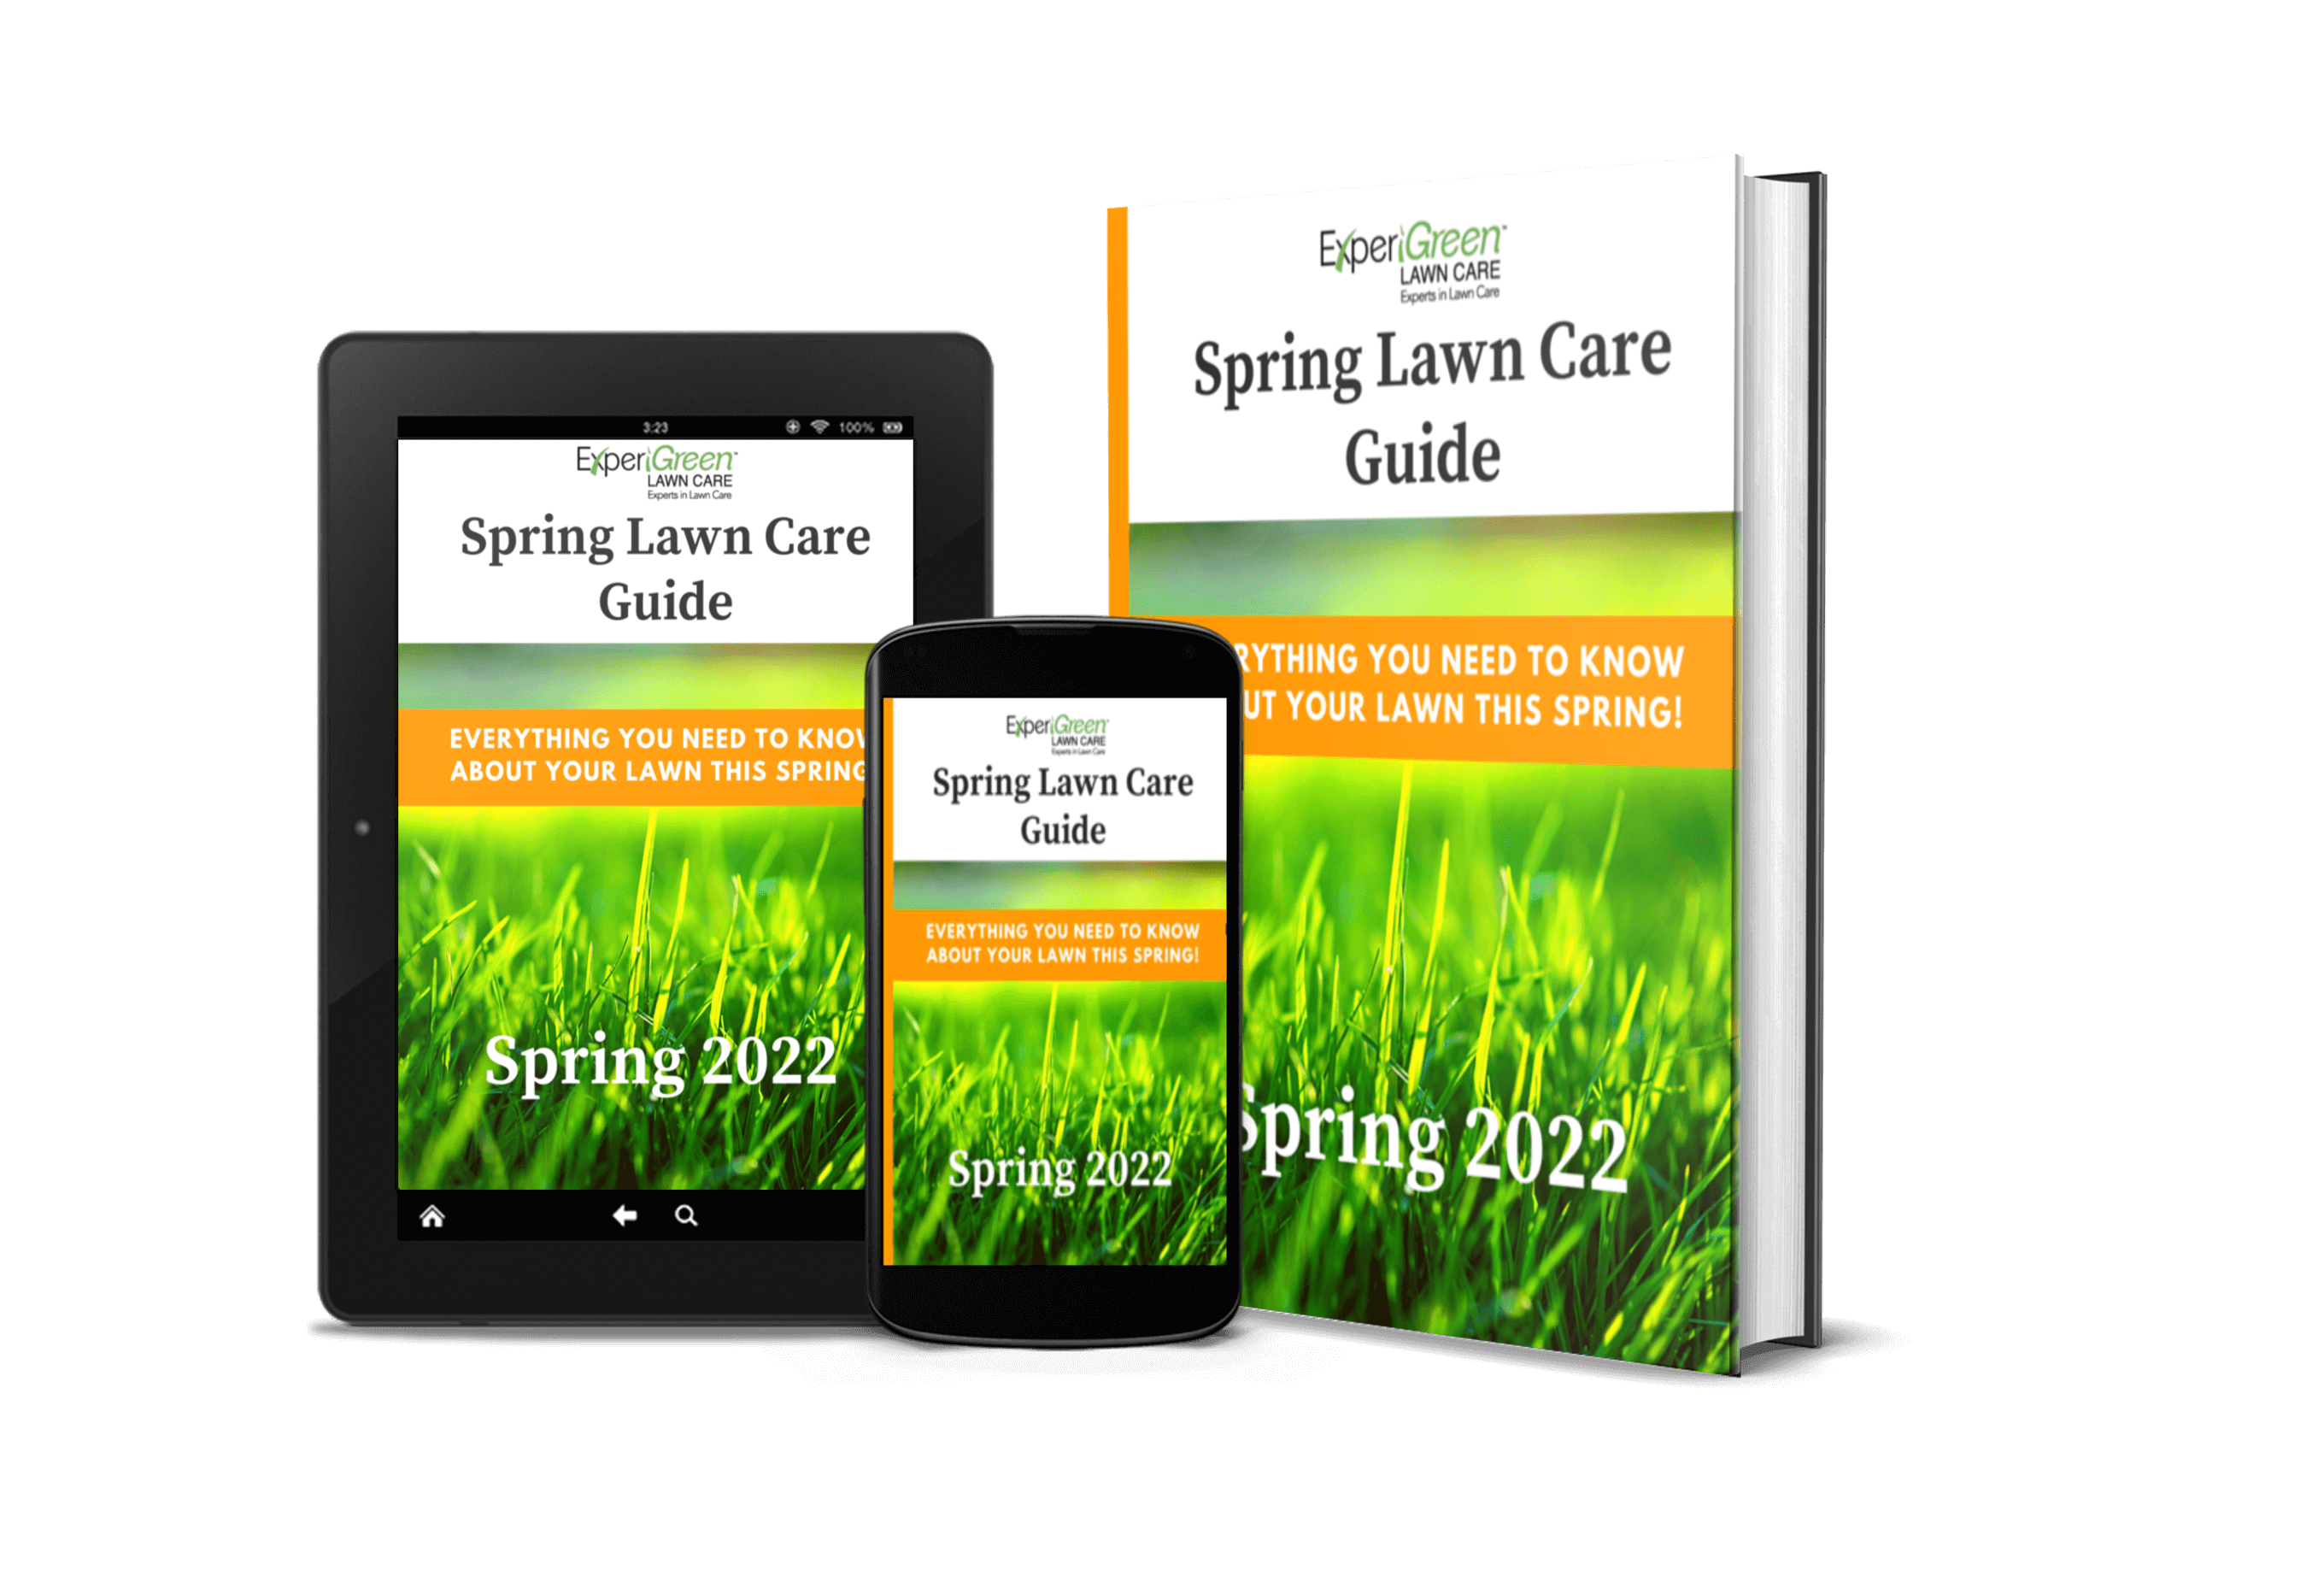 Spring 2022 Lawn Care Guide